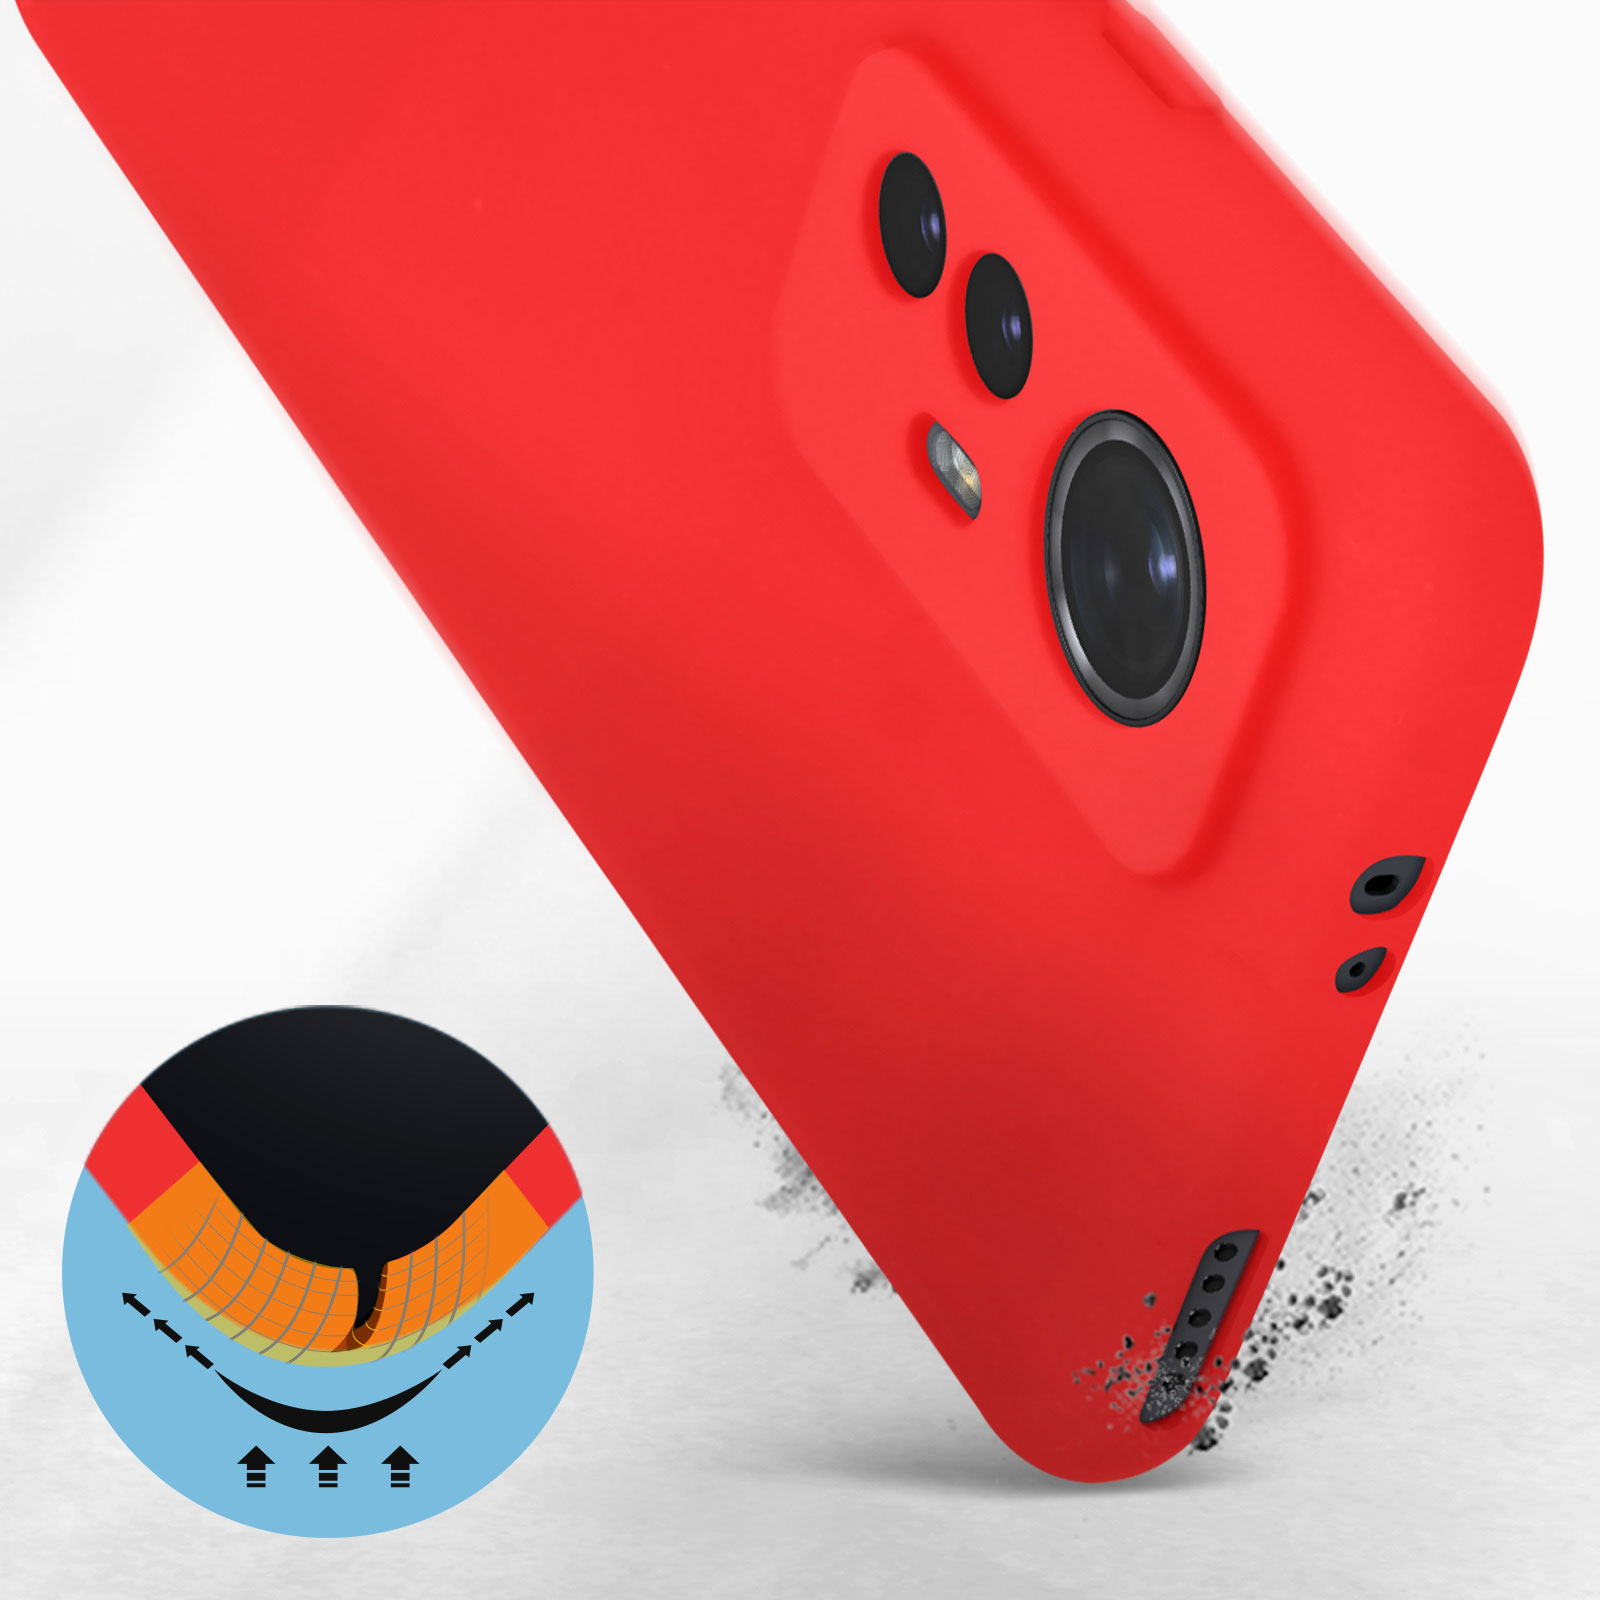 Rot Xiaomi, Backcover, AVIZAR 12T Soft Pro, Touch Series,